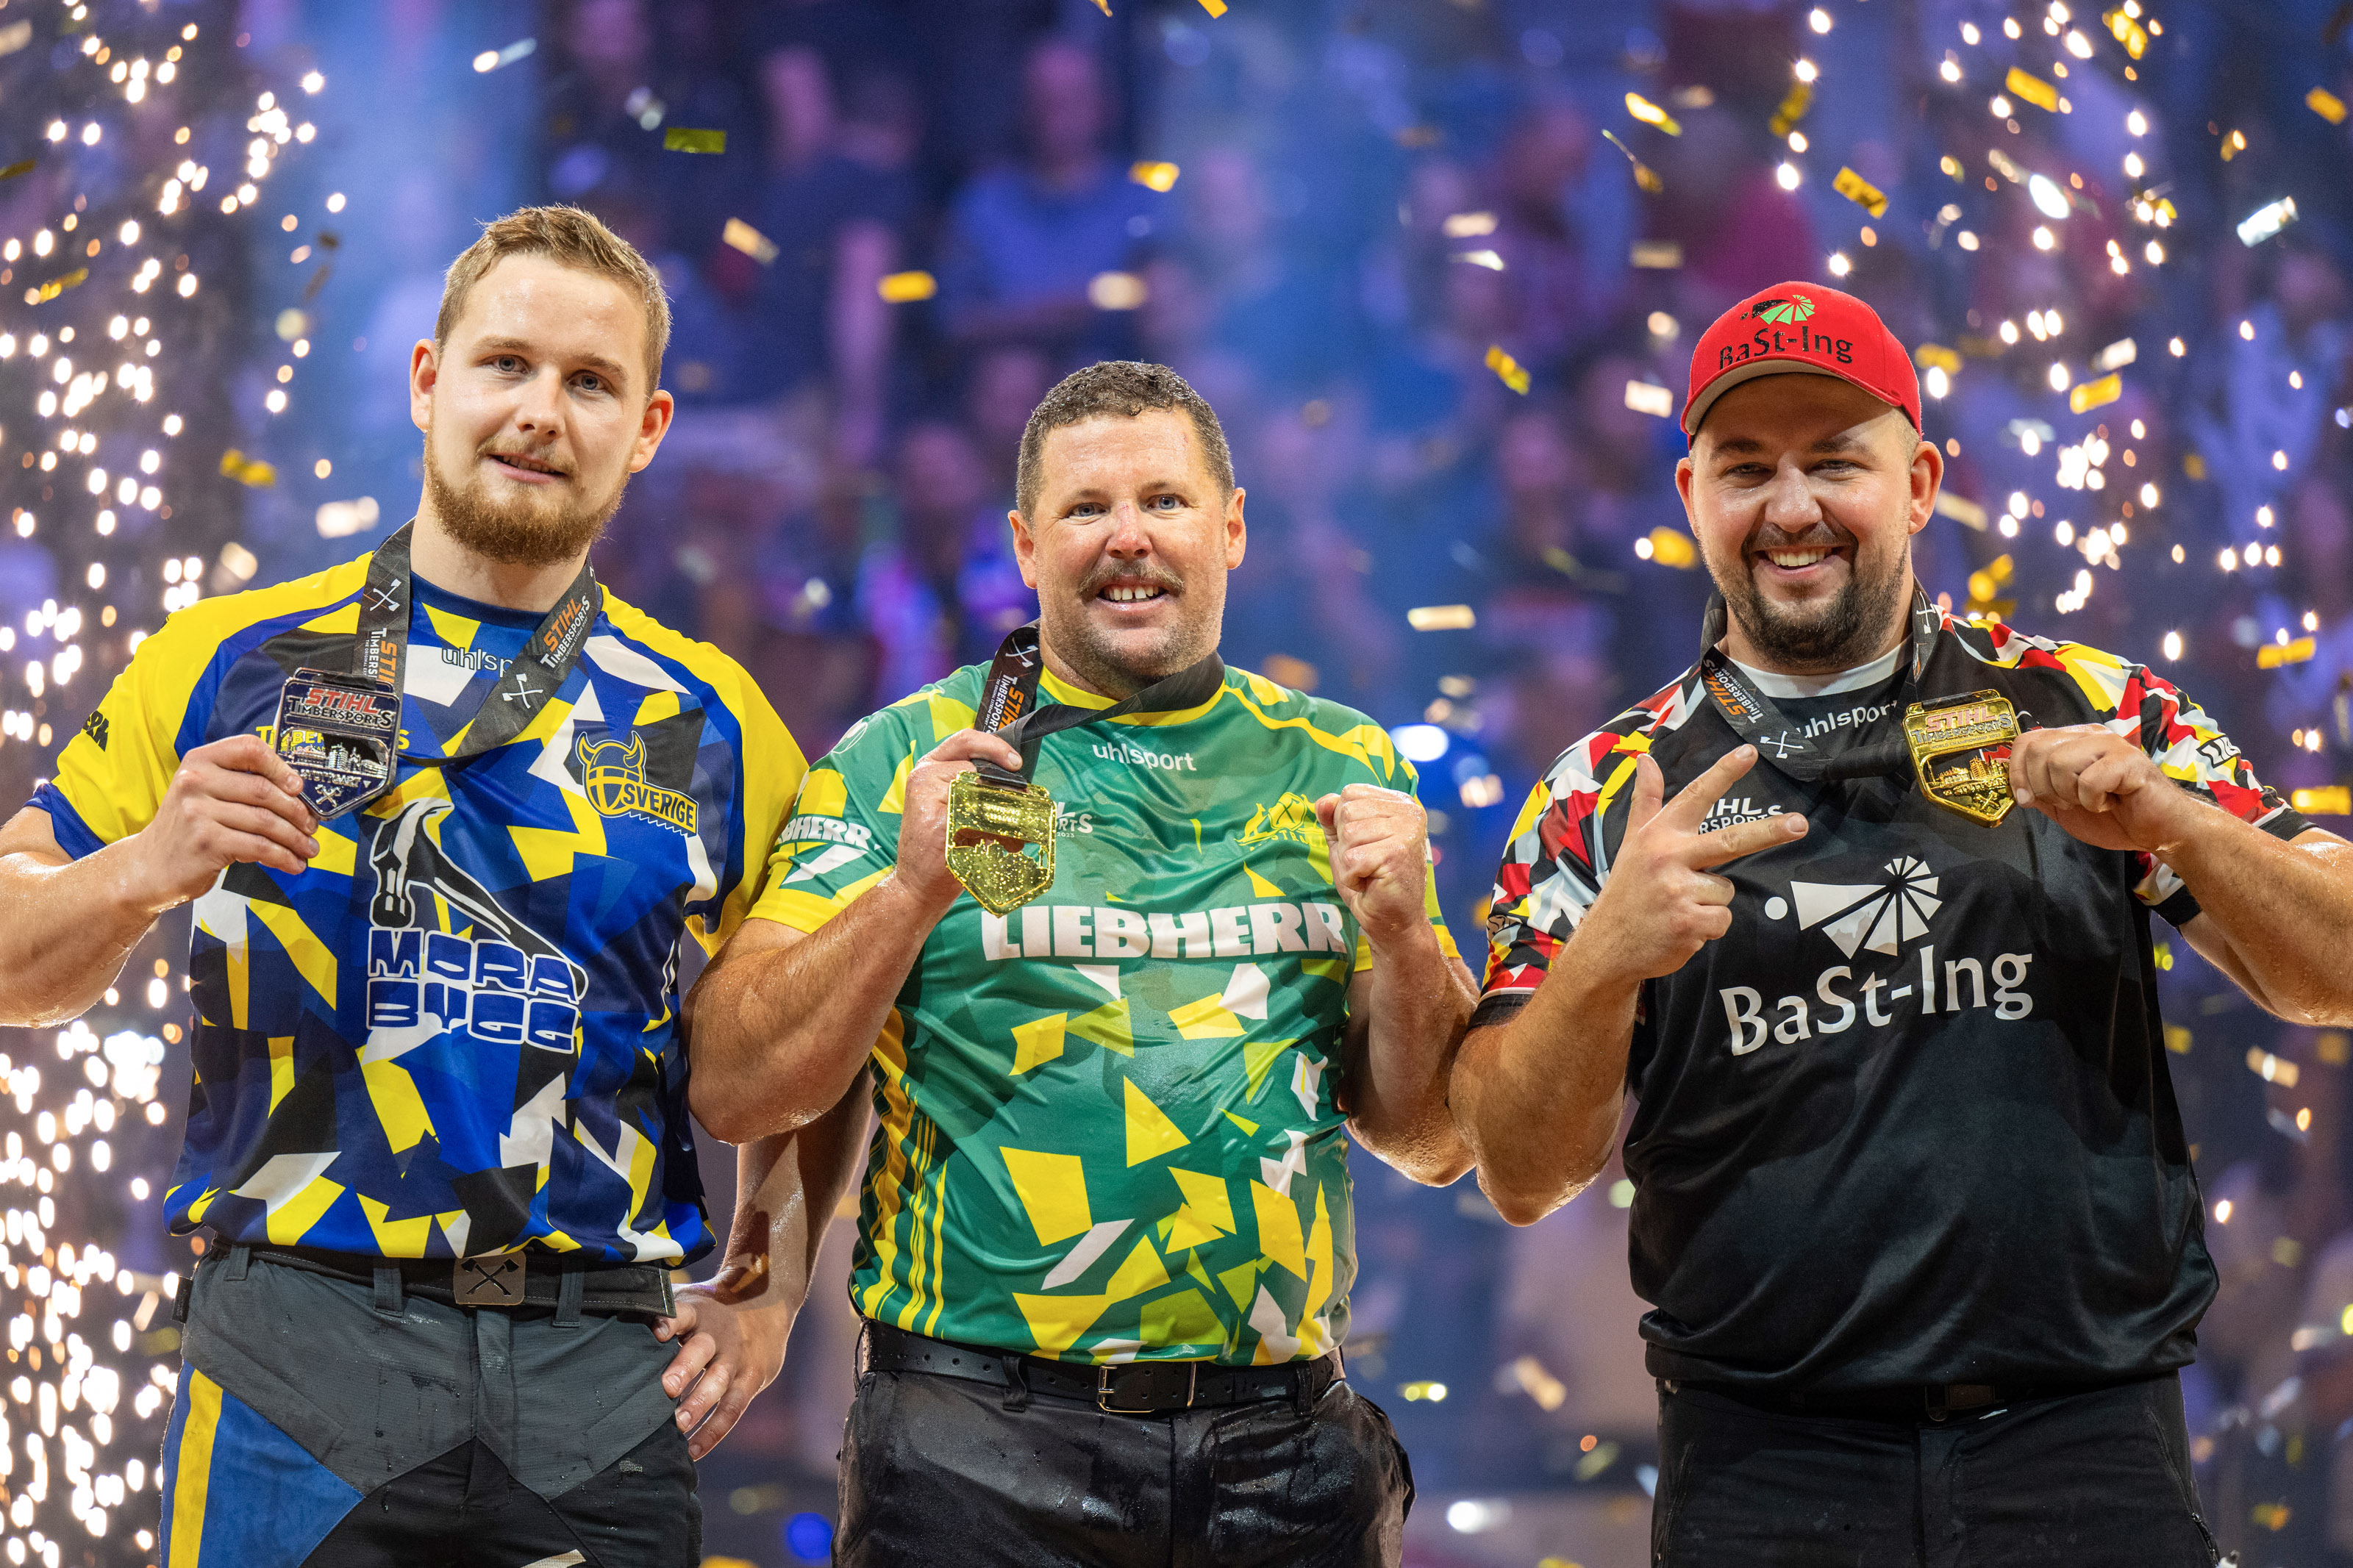 Swedish Emil Hansson is second best in the world in TIMBERSPORTS®, following his historic World Championship silver.